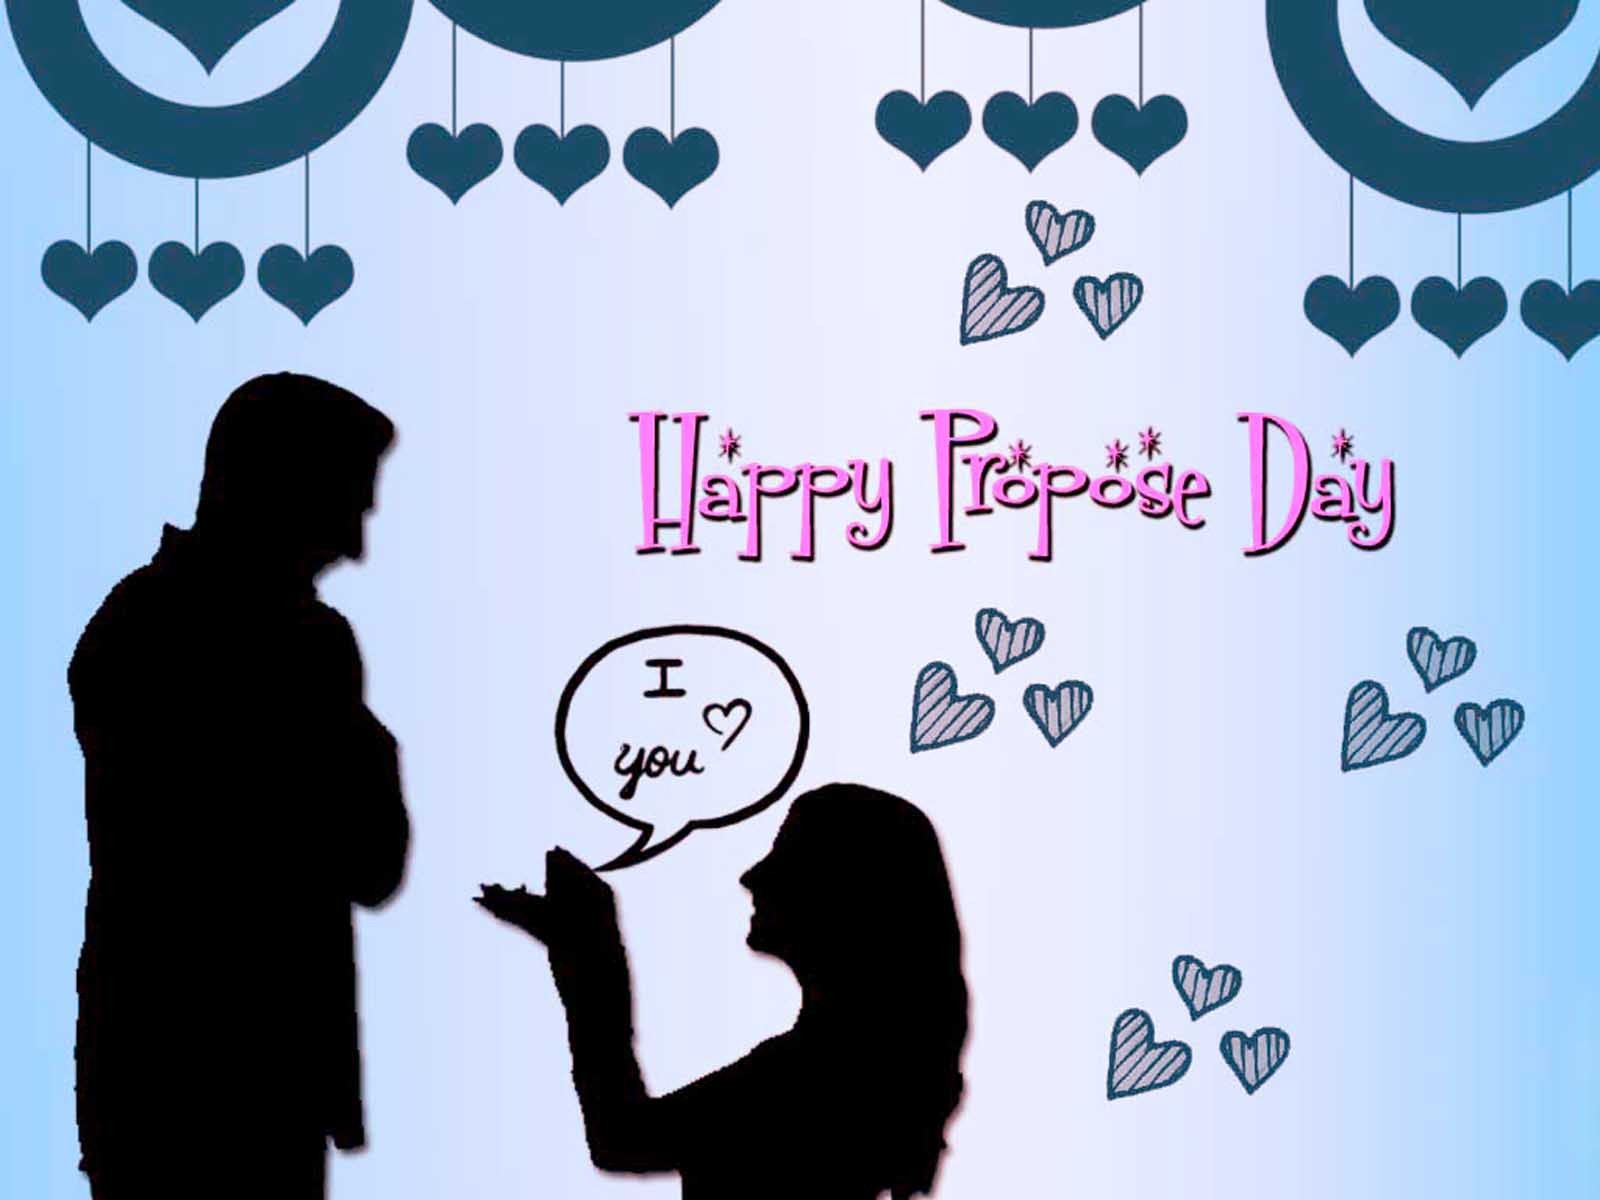 Happy Propose Day Messages, Sms, Wallpapers For Boyfriend - Propose Day For Boyfriend - HD Wallpaper 